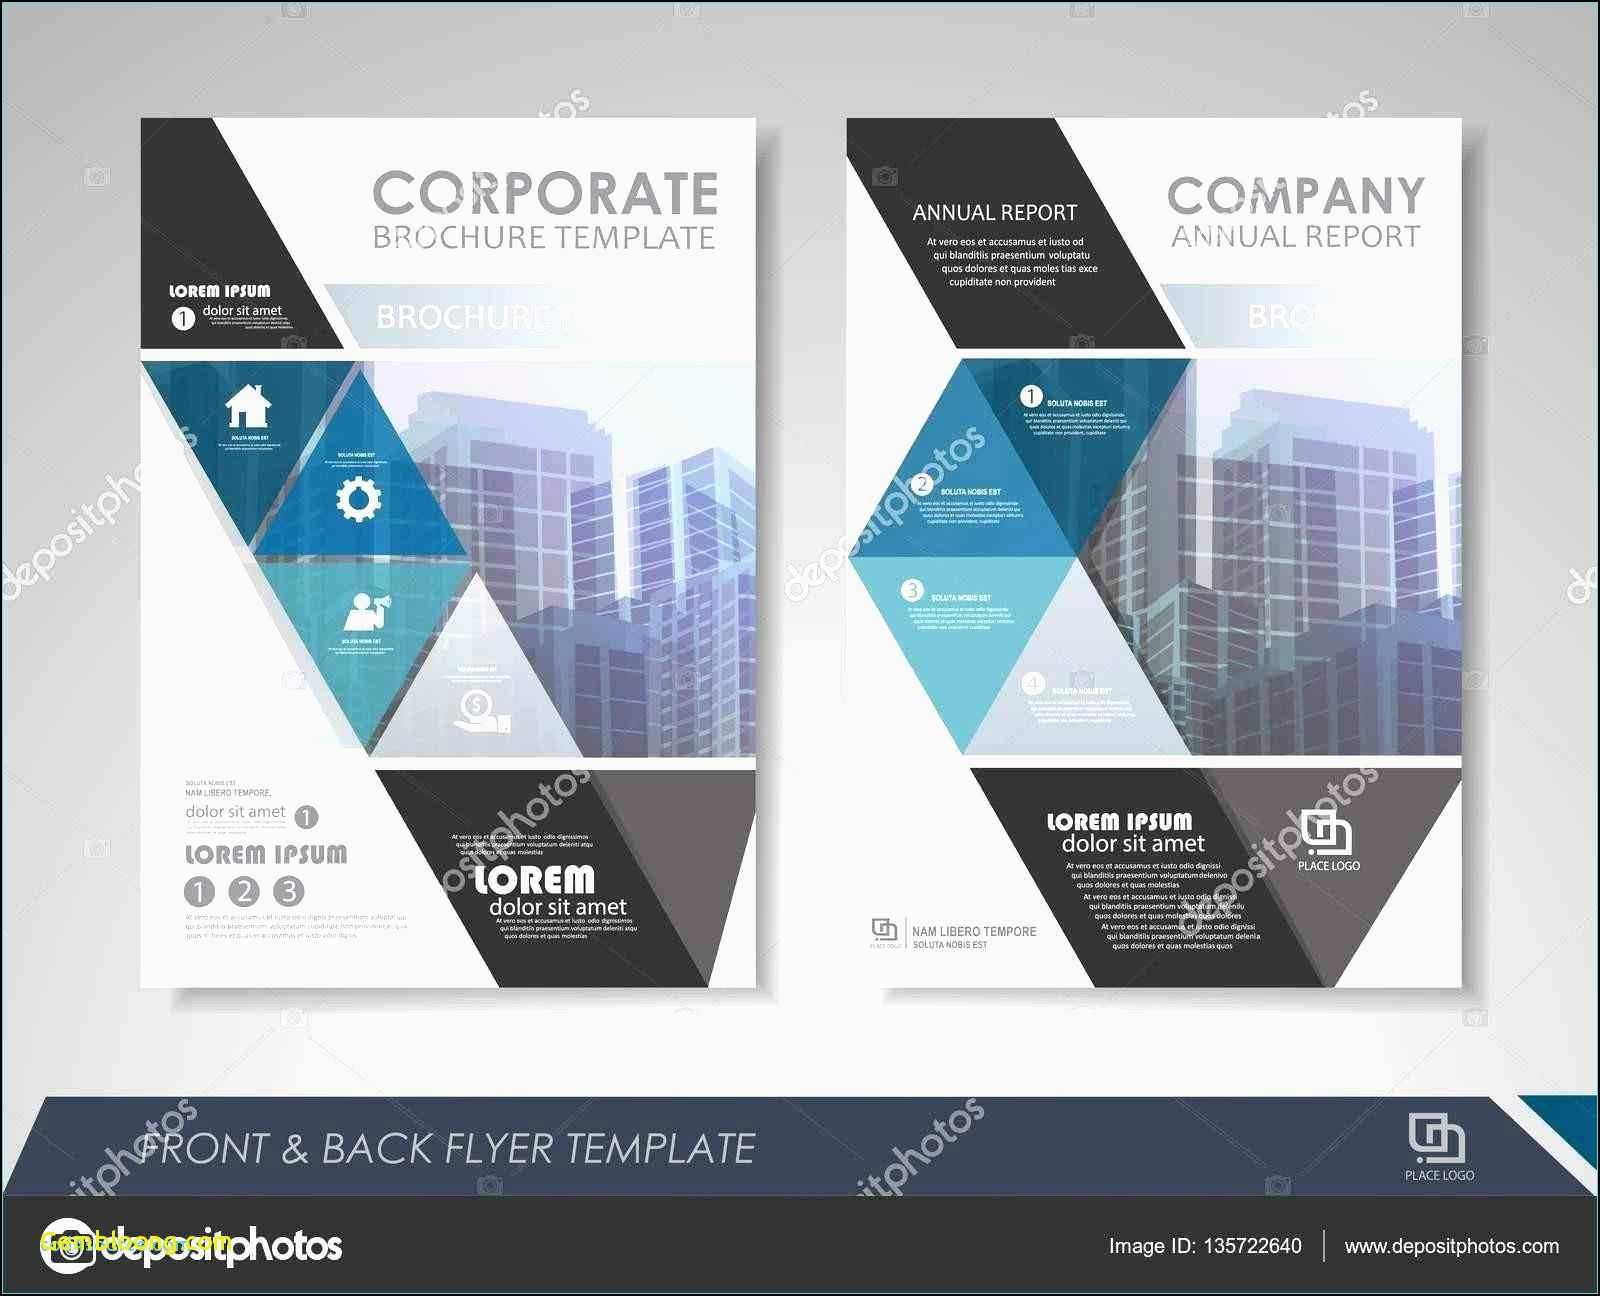 008 Indesign Brochure Templates Free Download Template Pertaining To Illustrator Brochure Templates Free Download